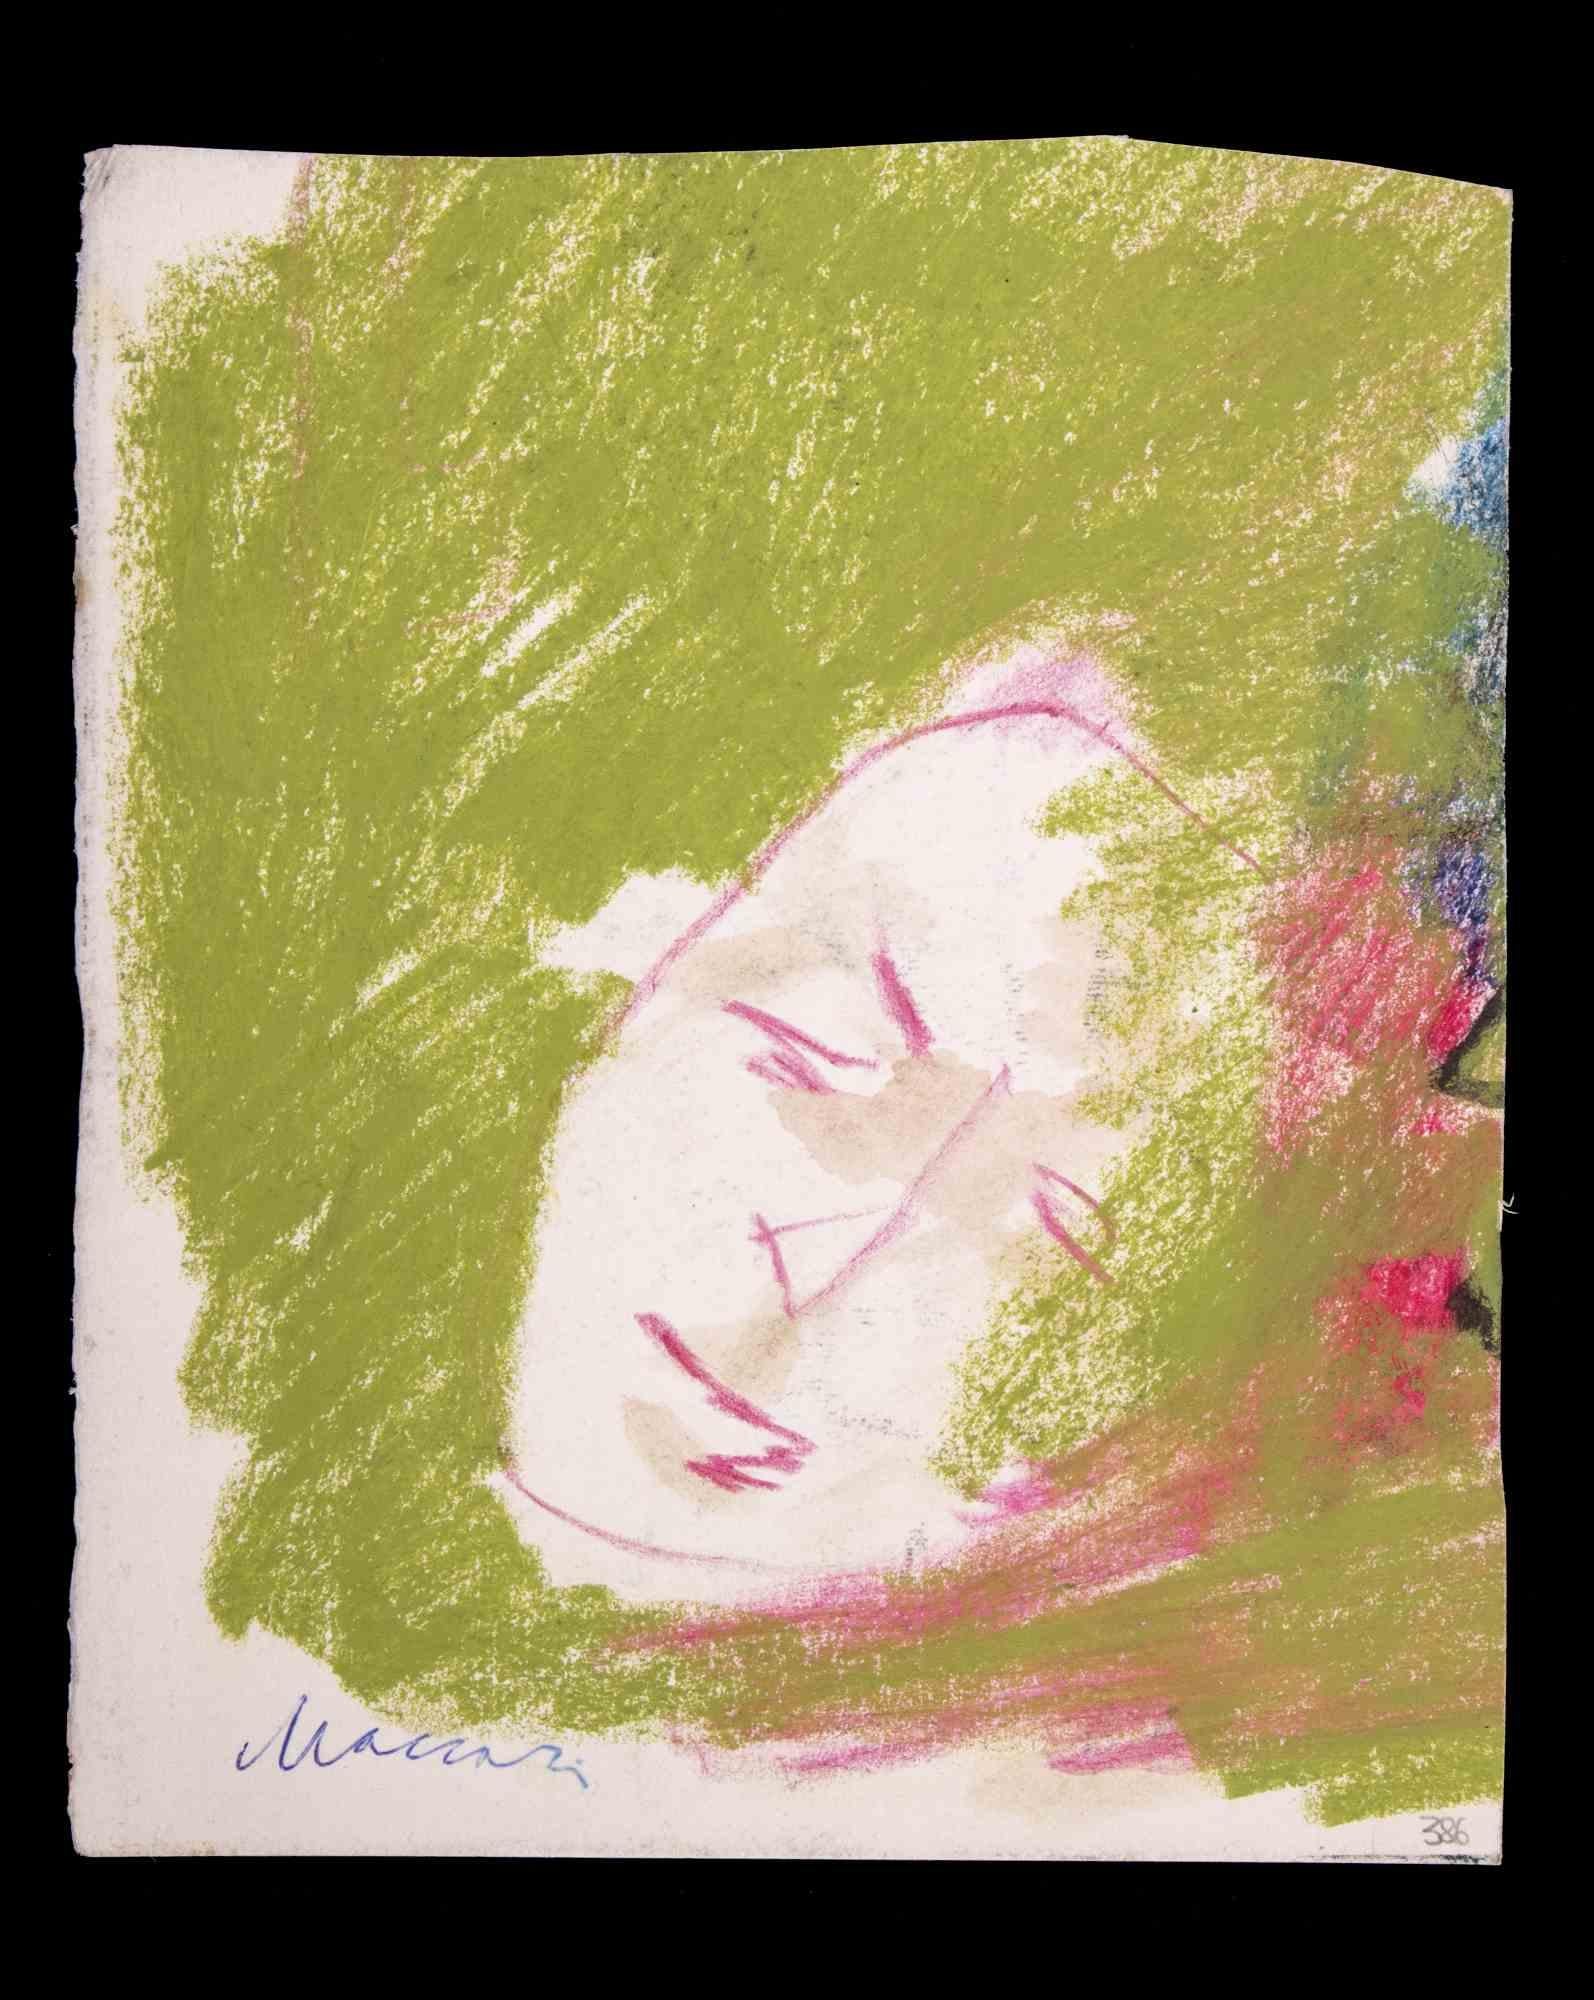 Face is a Pastel Drawing realized by Mino Maccari  (1924-1989) in 1980s.

Hand-signed on the lower margin.

Good condition on a little cardboaard.

Mino Maccari (Siena, 1924-Rome, June 16, 1989) was an Italian writer, painter, engraver and